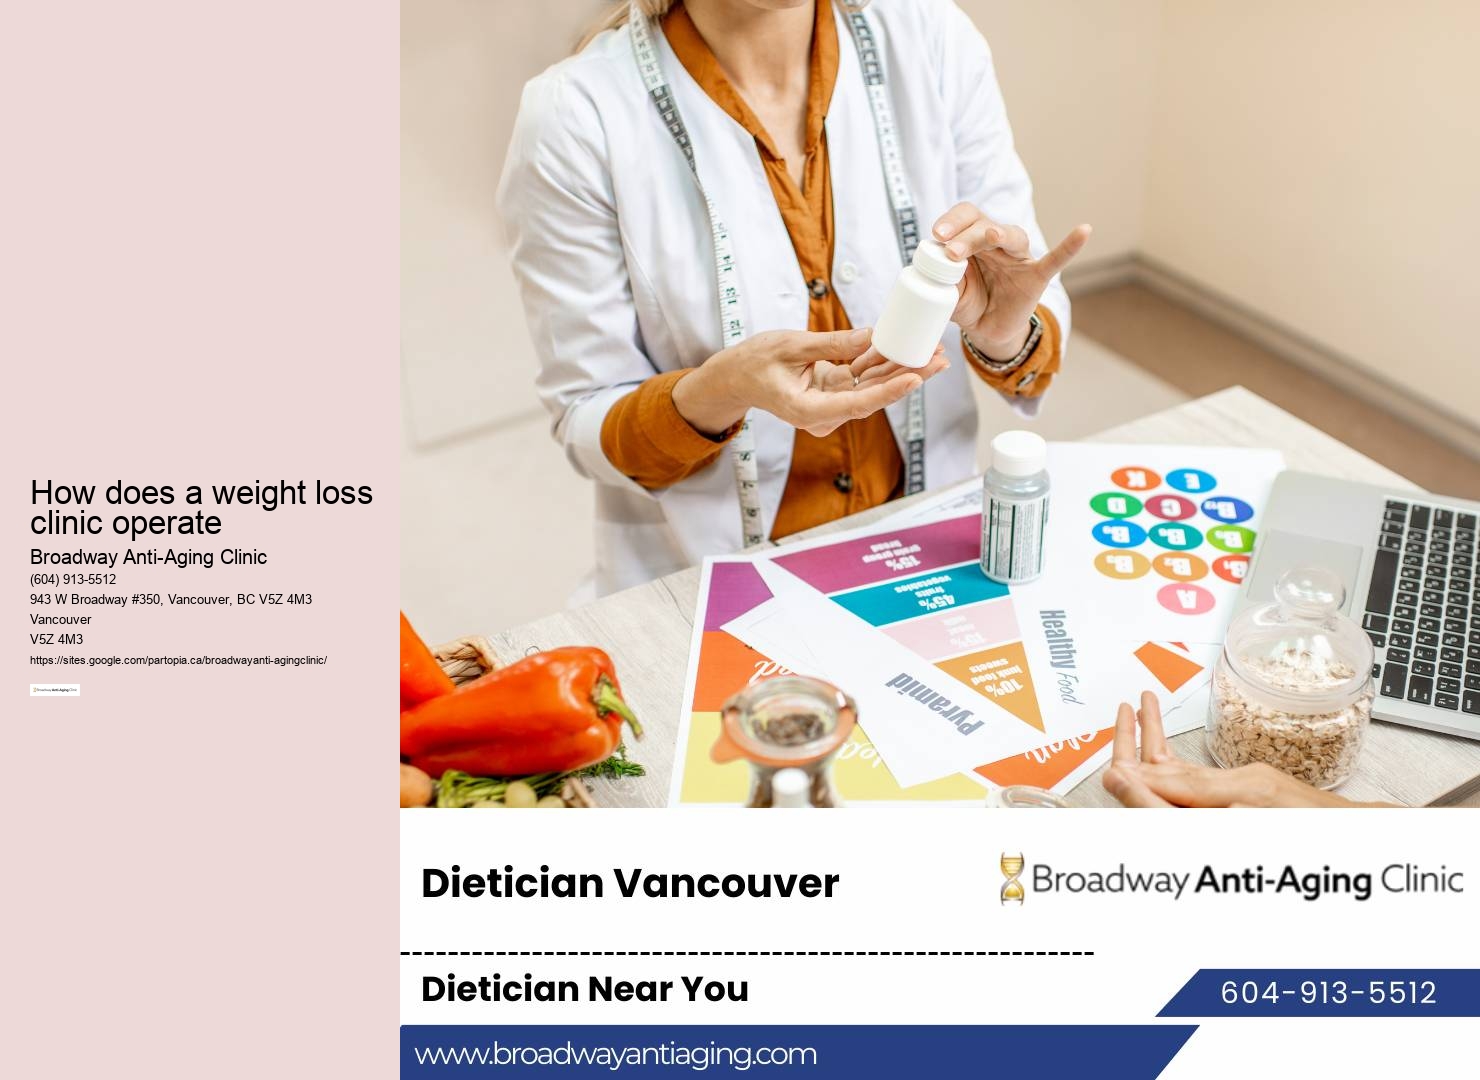 Vancouver's Value-for-Money Weight Loss Solutions